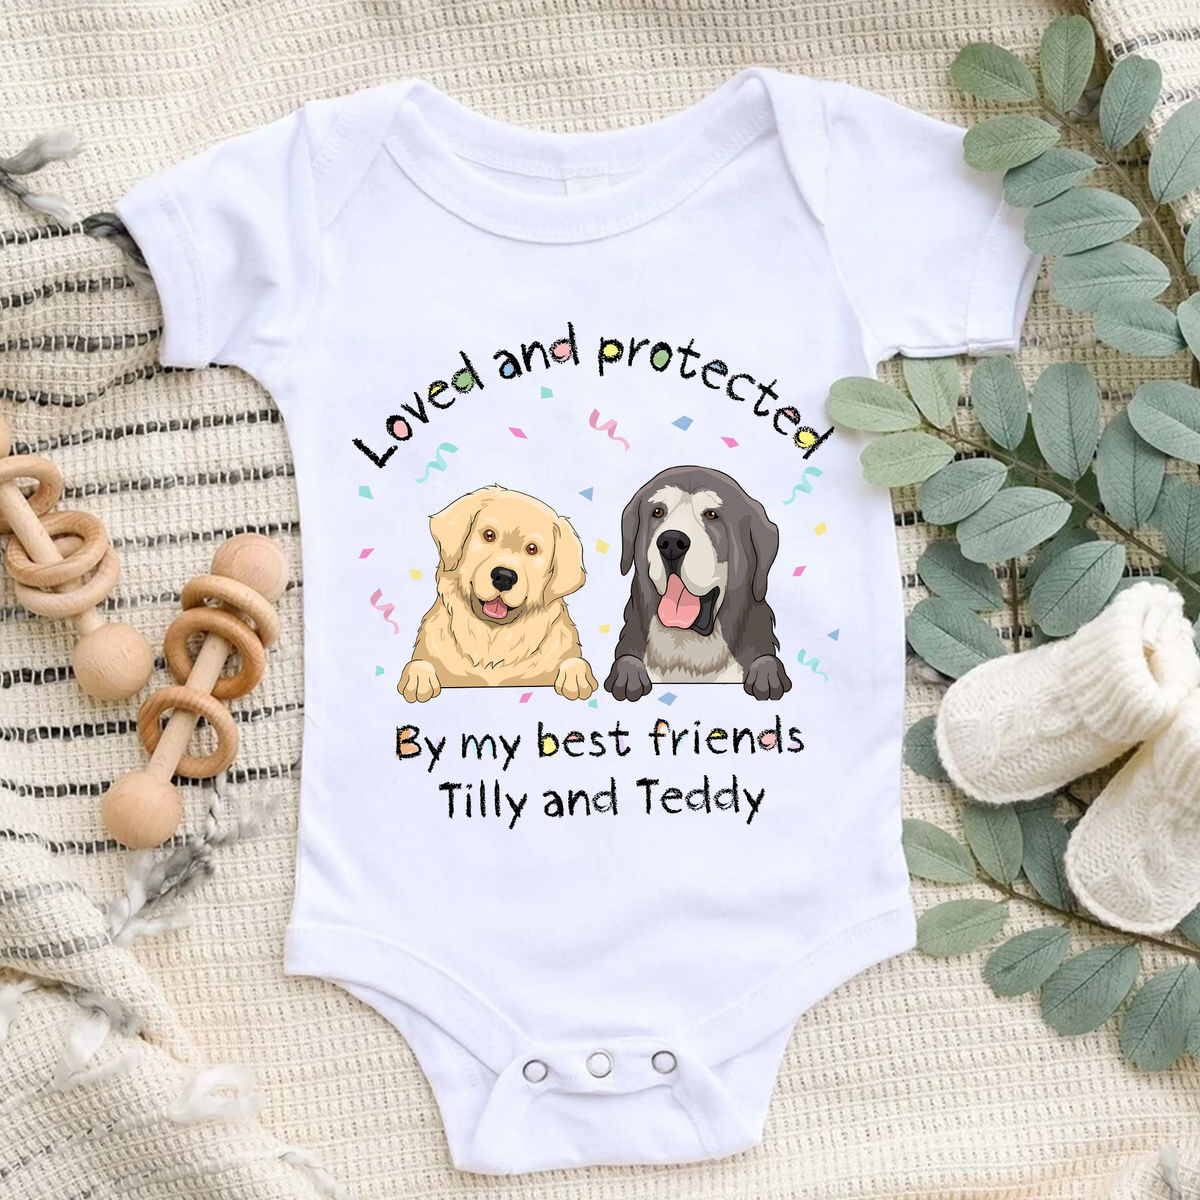 Personalized Shirt - Custom Baby Onesies - Loved and Protected By my best friends_2